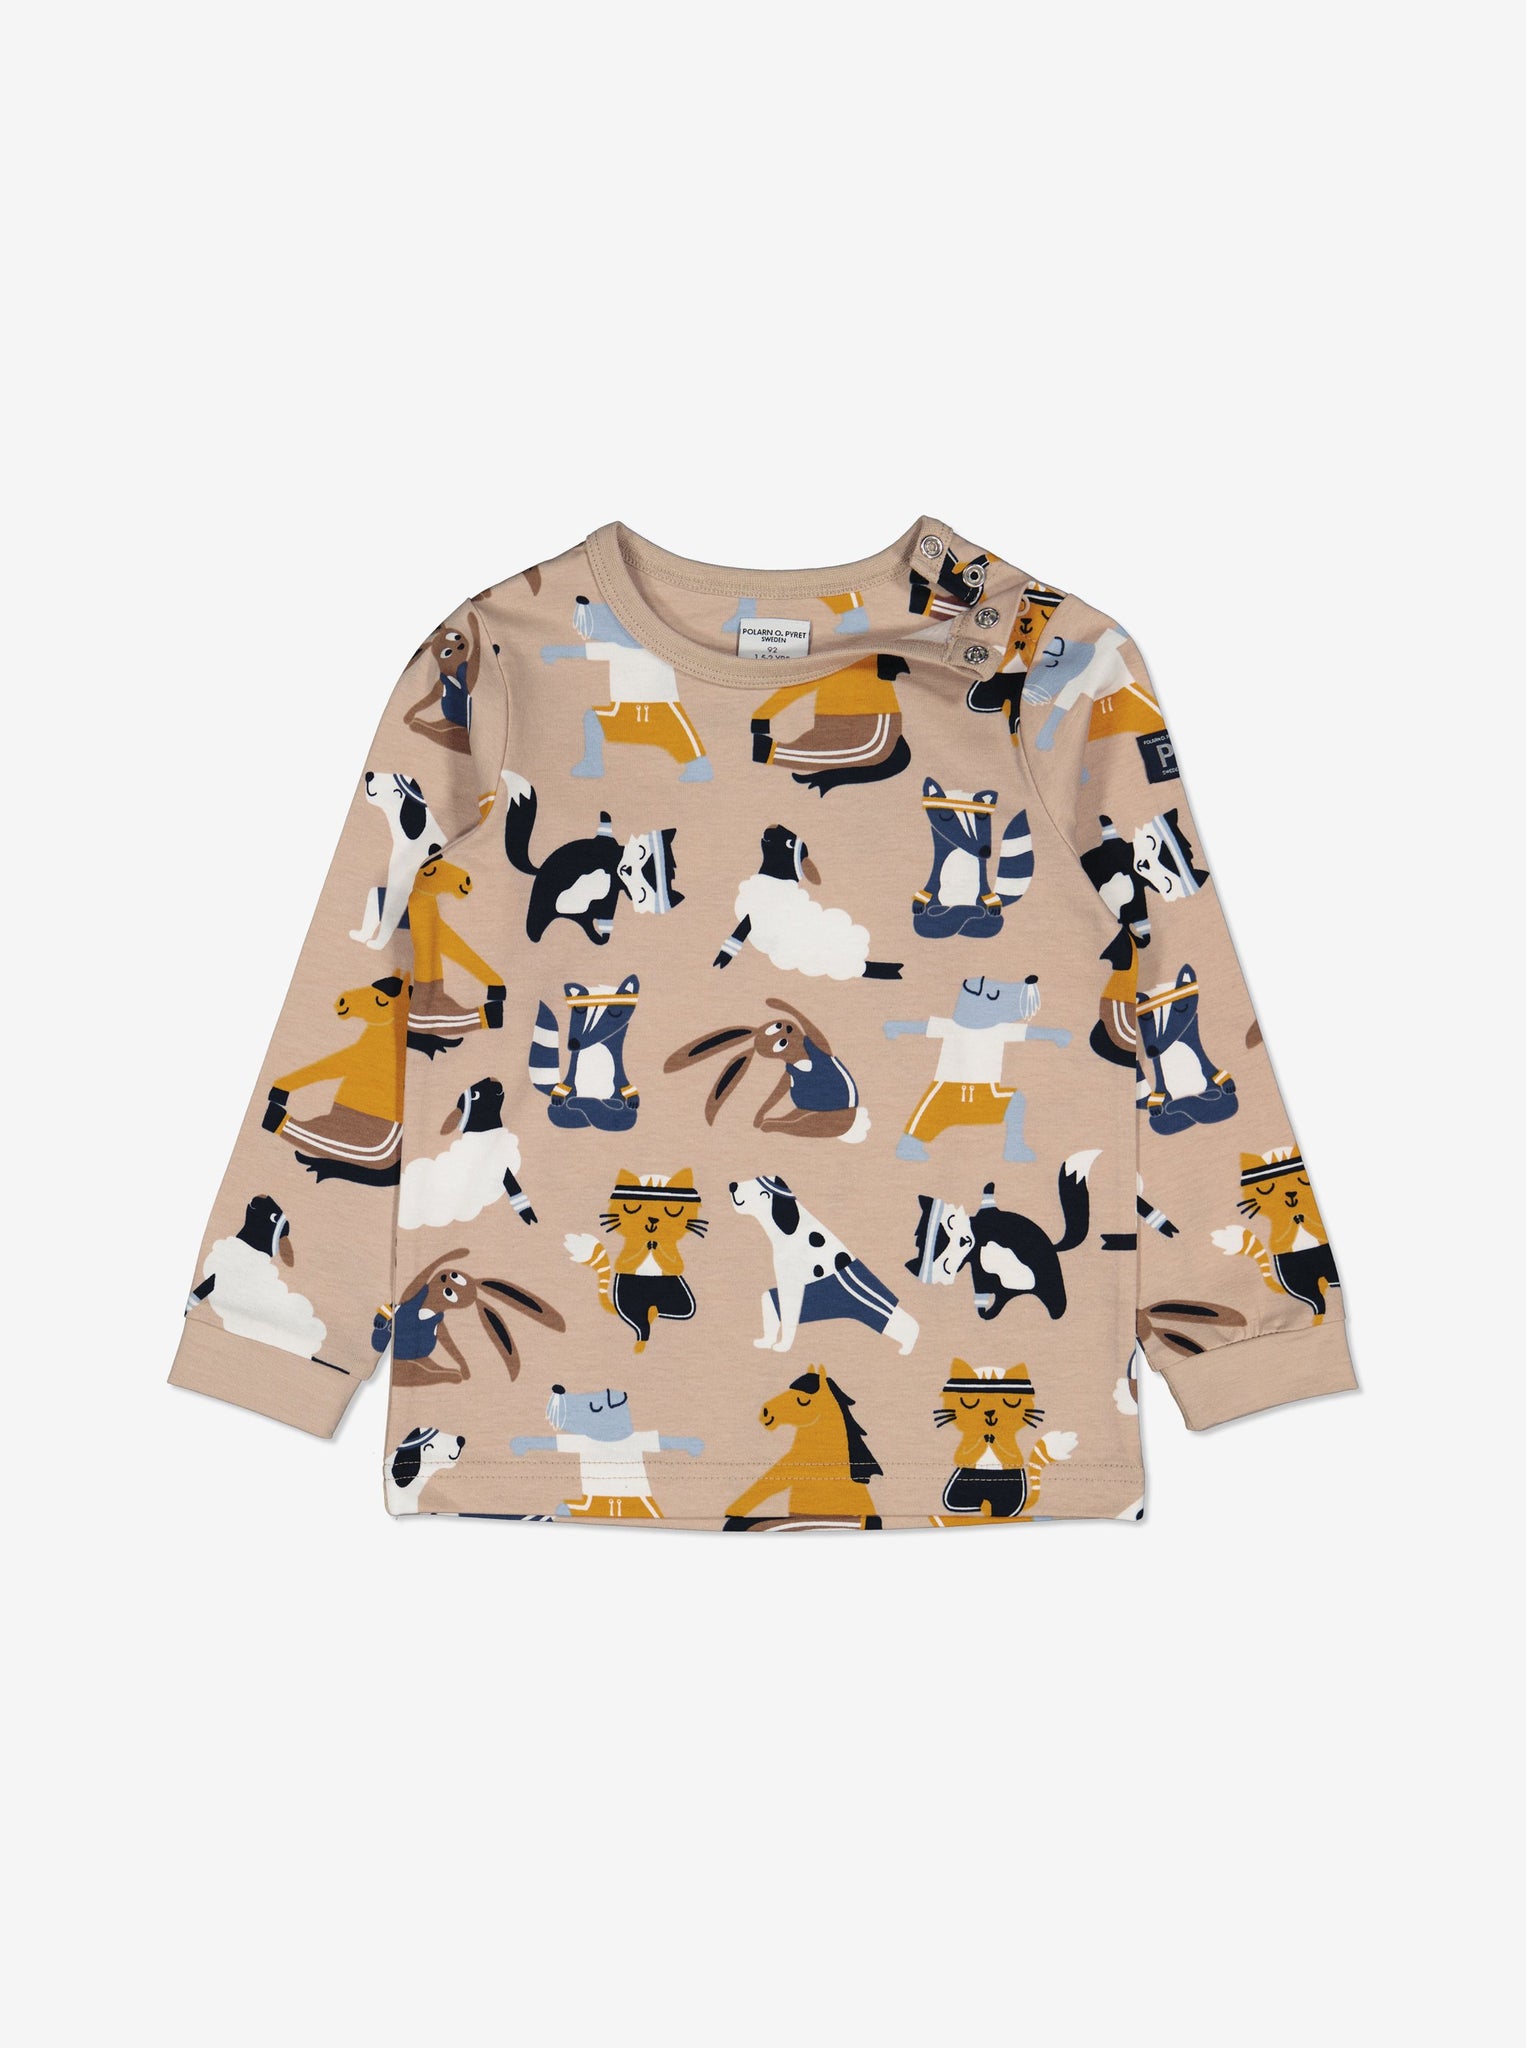  Organic Beige Animal Kids Top from Polarn O. Pyret Kidswear. Made from eco-friendly materials.